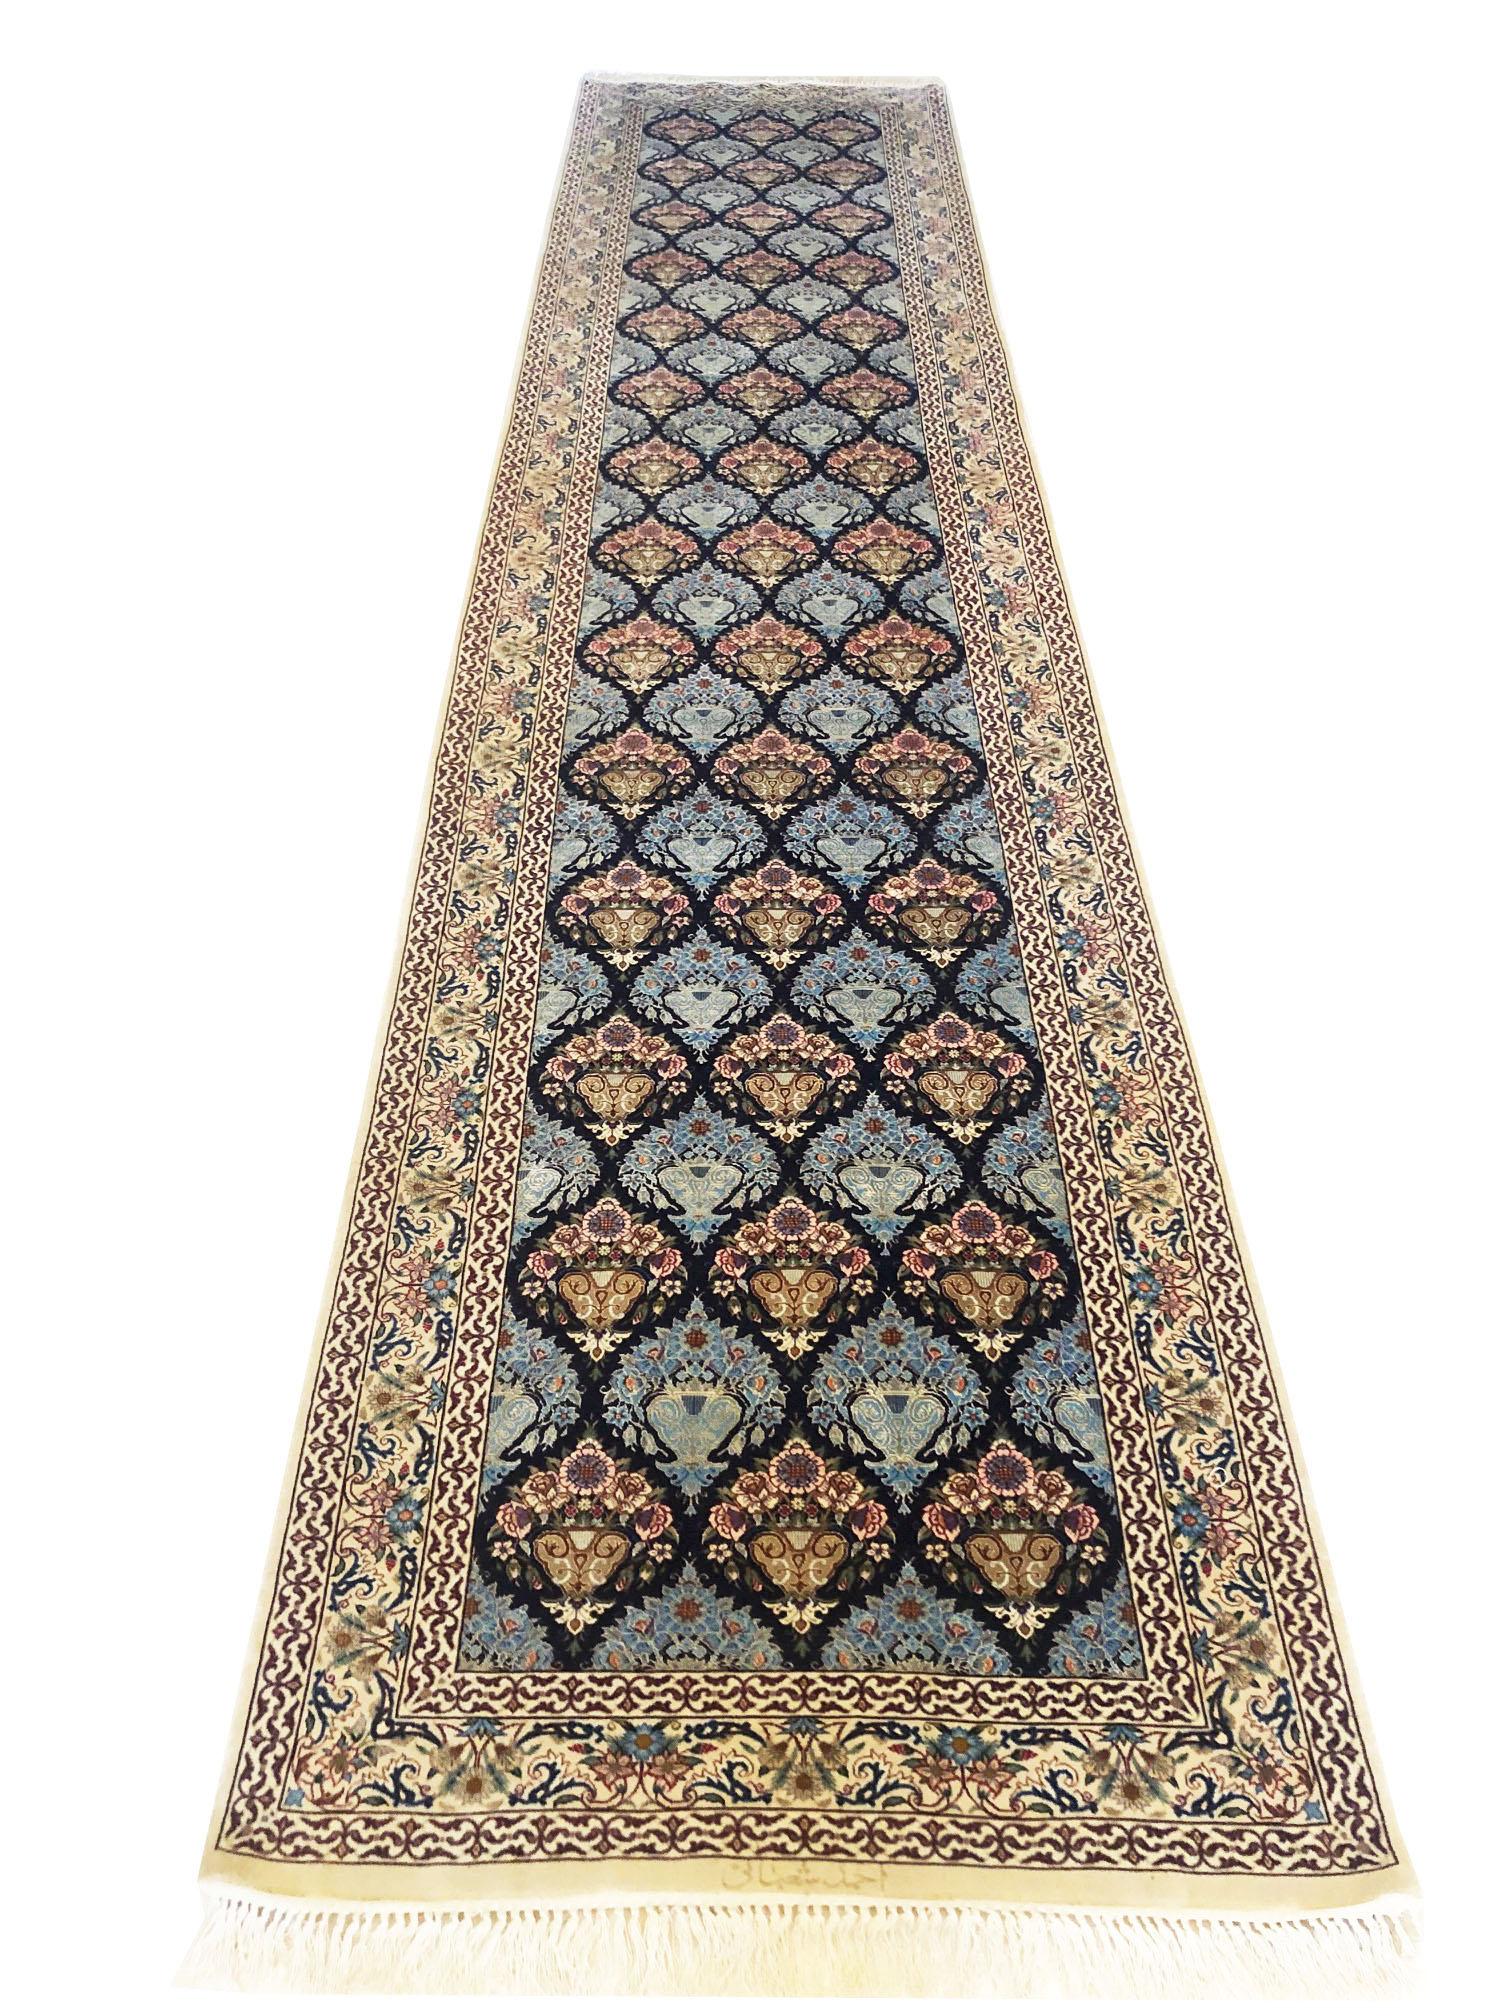 This authentic Persian Isfahan rug has wool and silk pile on silk foundation is a stunning example of the all-over floral vase design rug. The beauty of this magnificent piece is most noticeable in its quality and color combination. This rug has